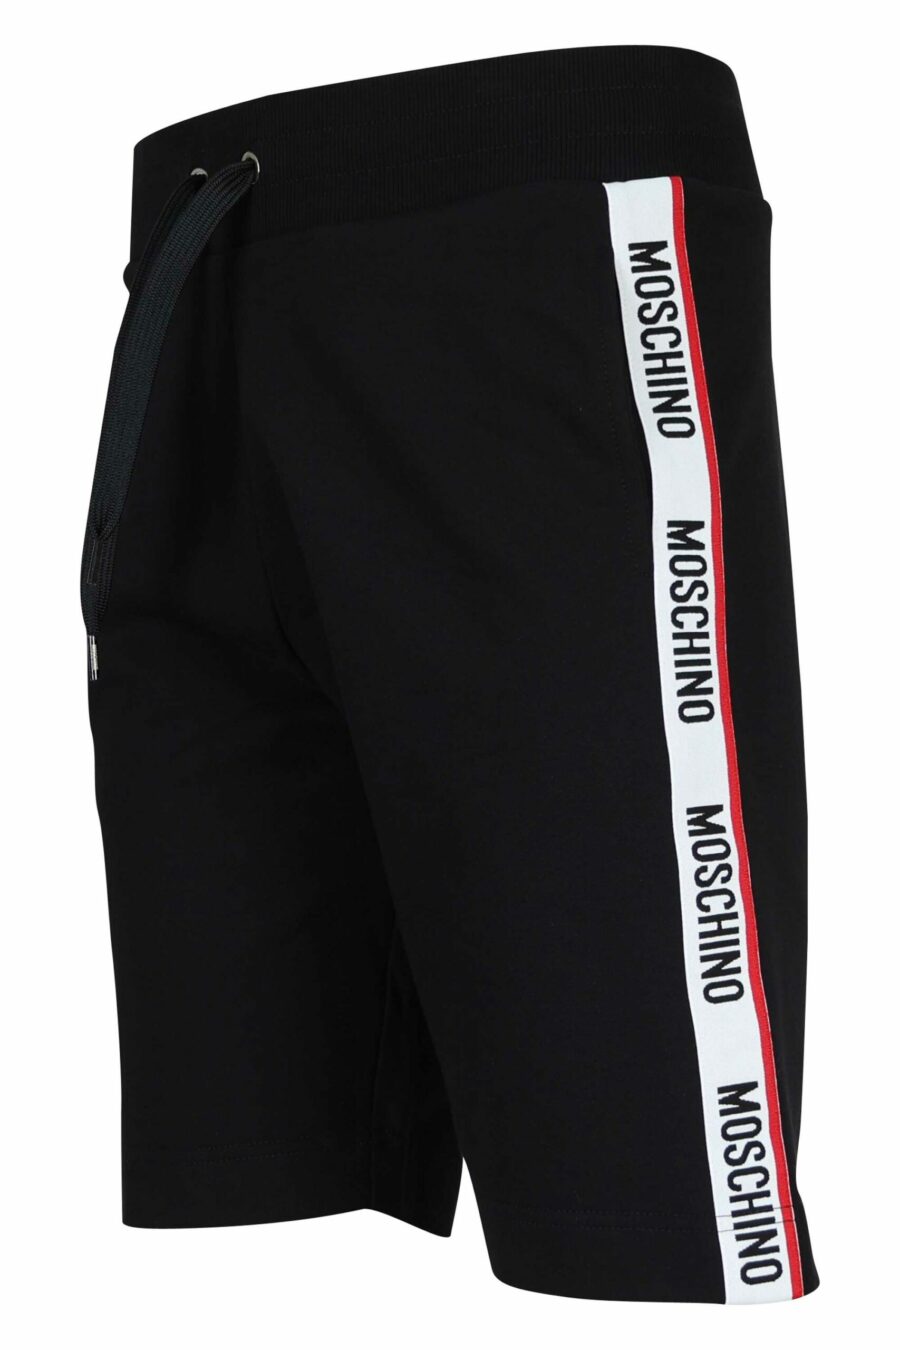 Tracksuit bottoms black with logo on vertical tape - 667113624945 1 scaled